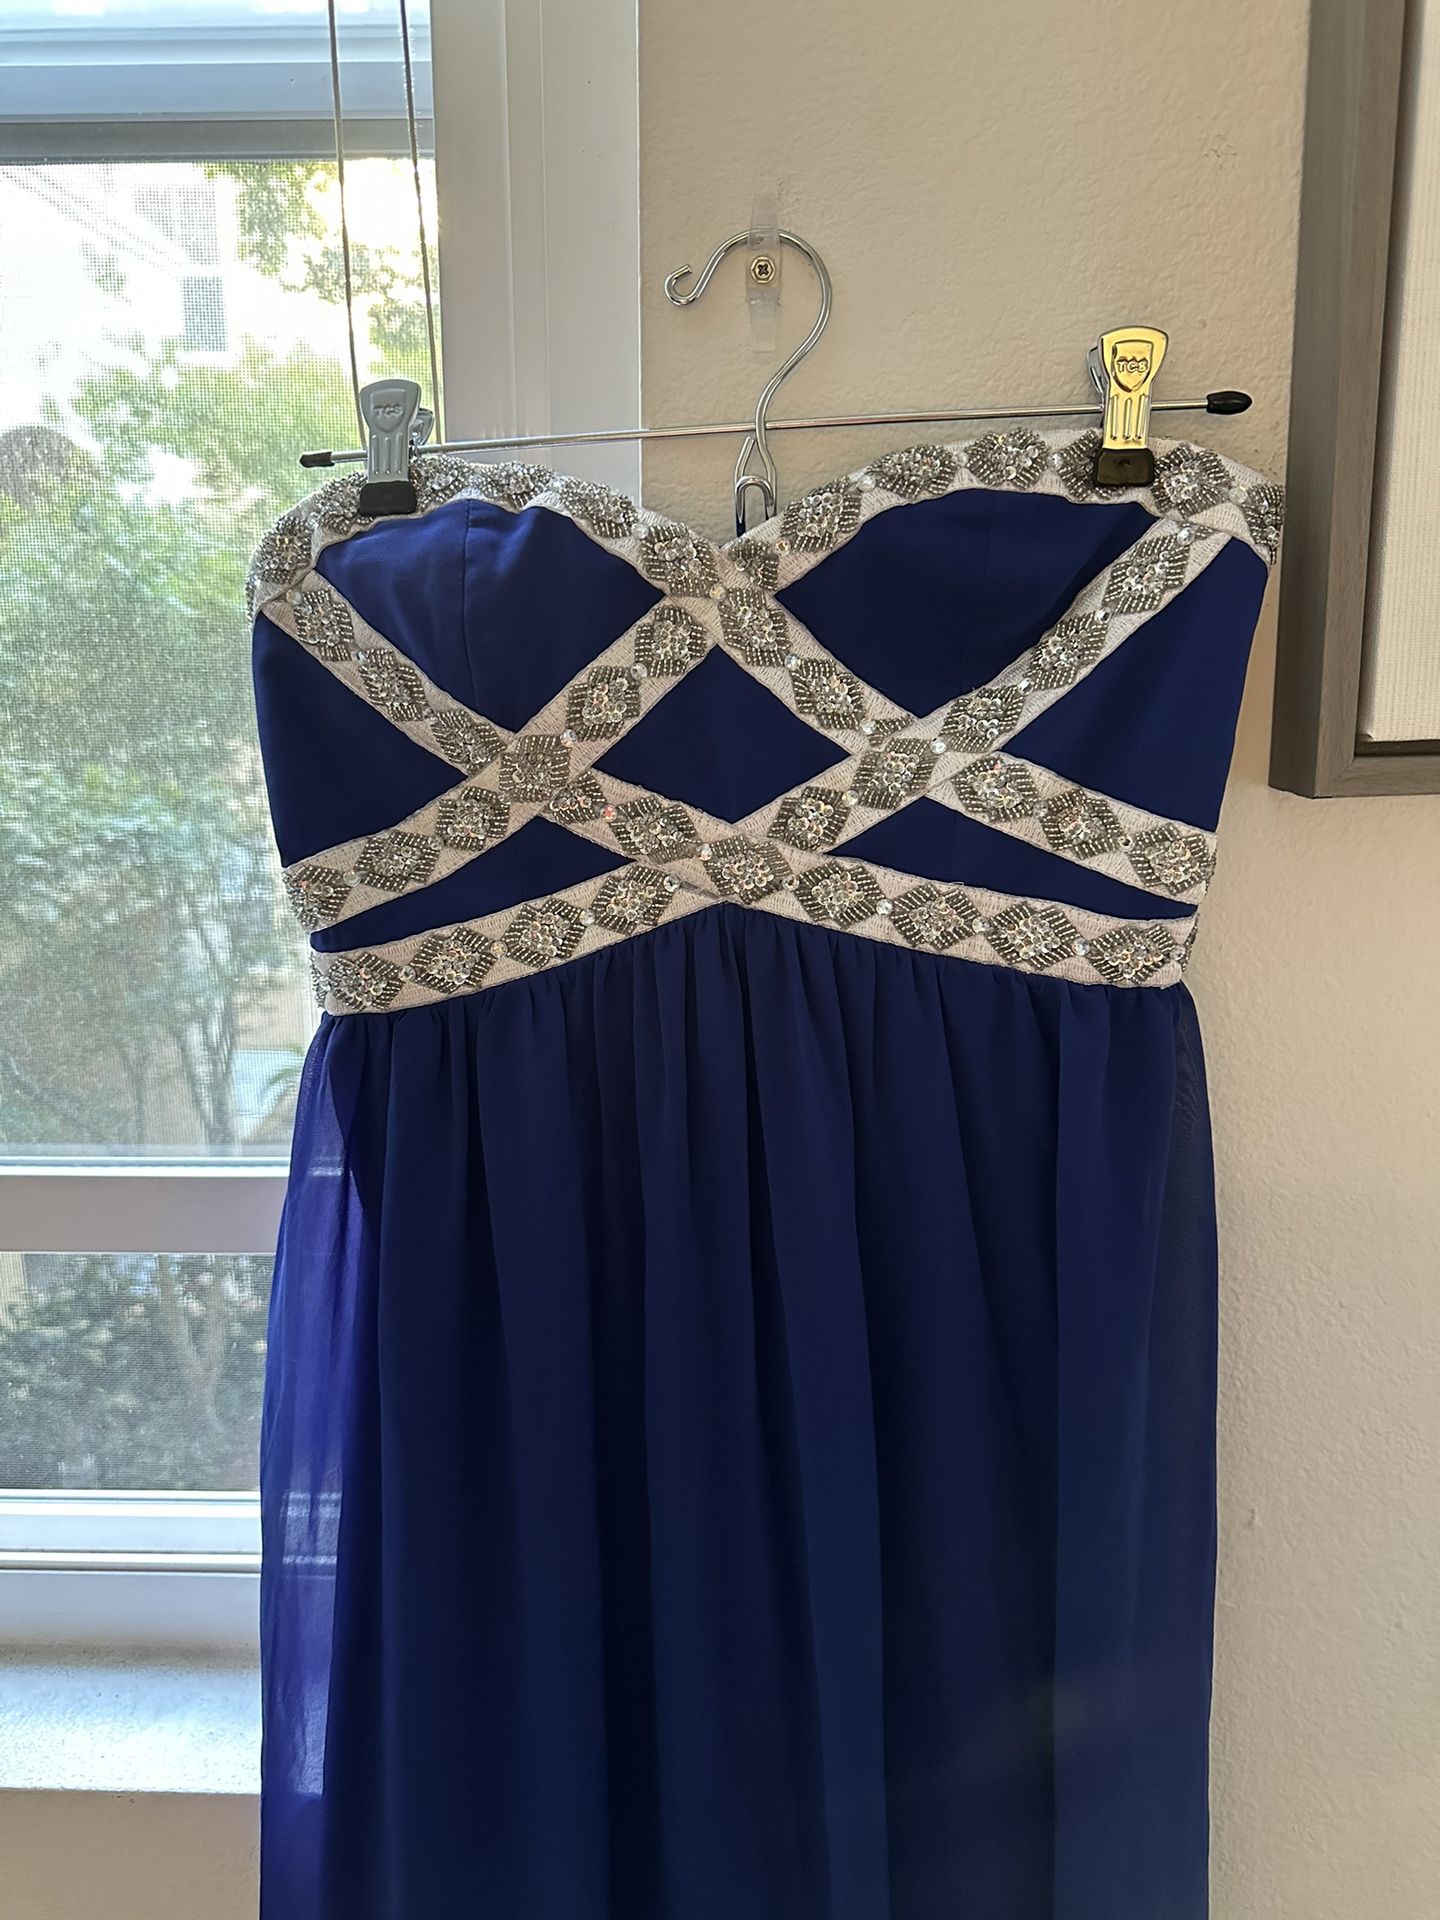 Royal Blue Strapless Silver jeweled Long Gown for Prom / formals / special events Size Medium 